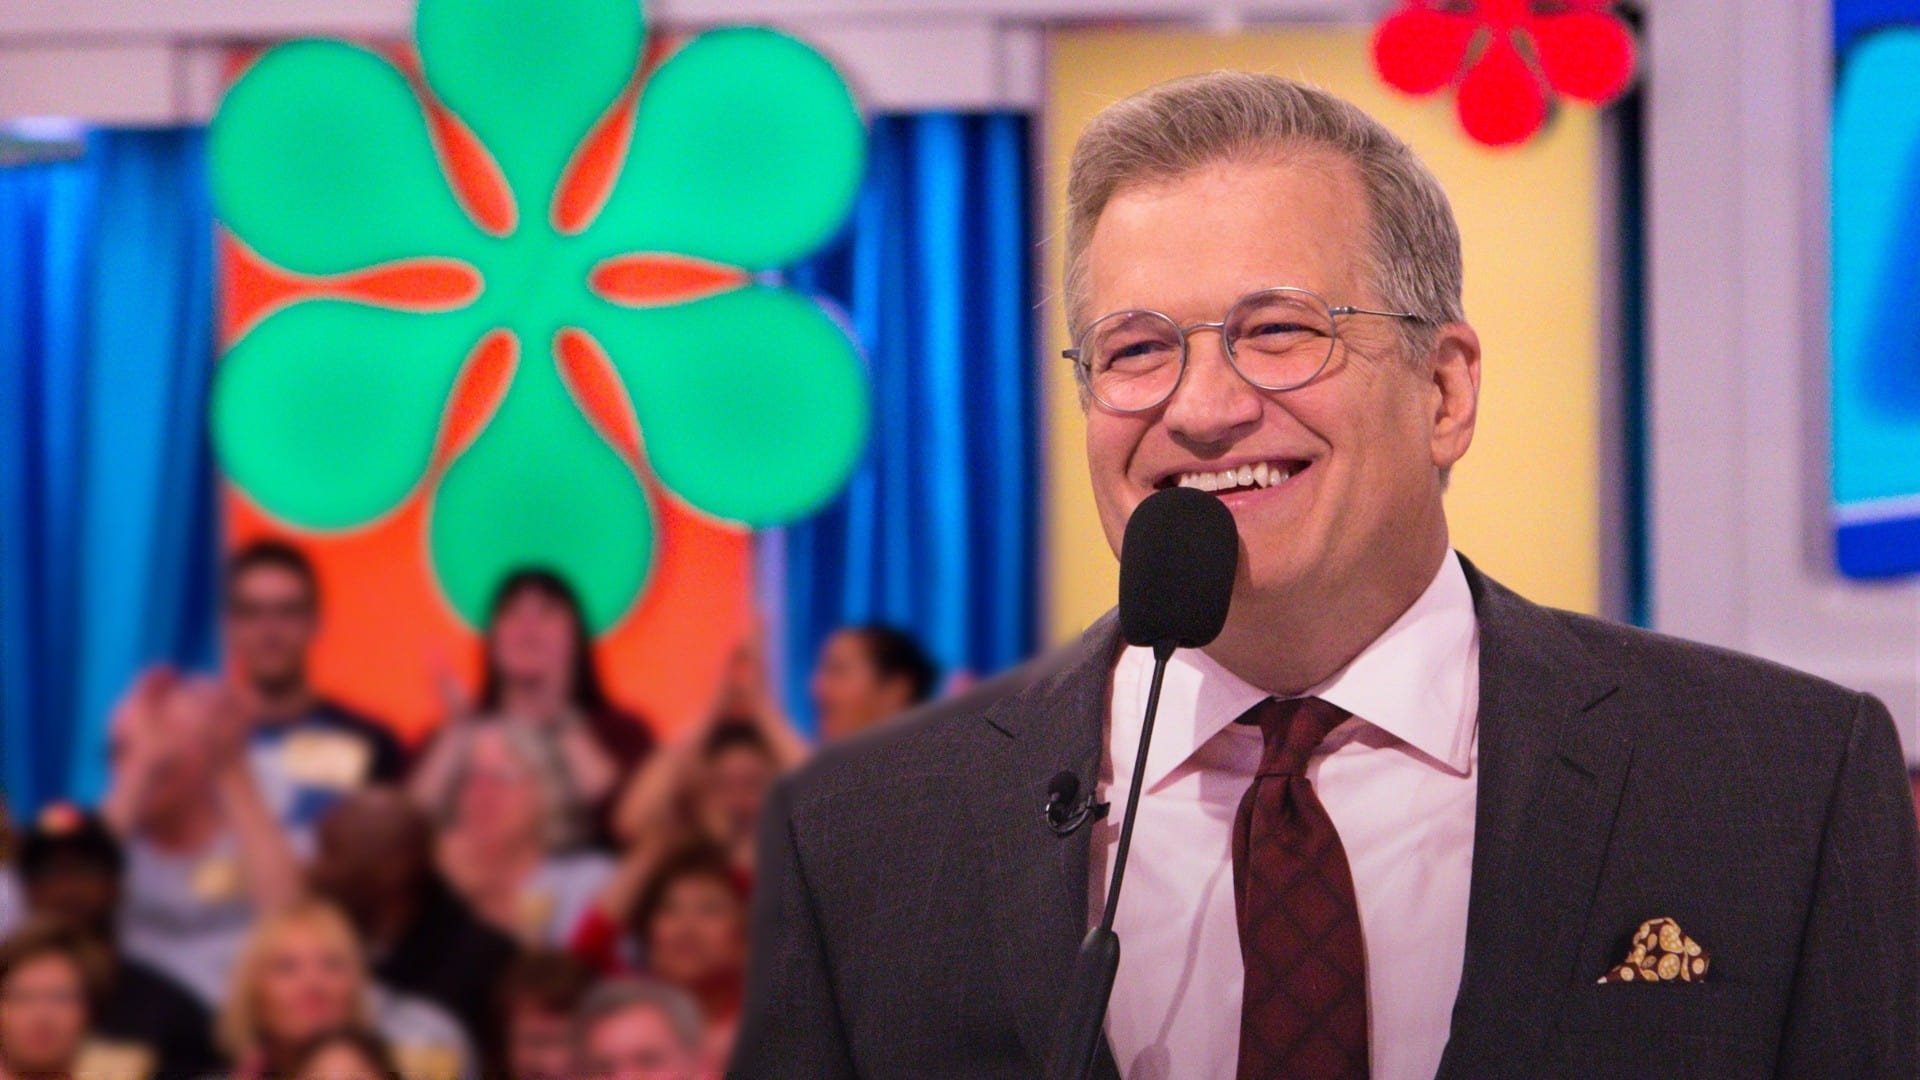 The Price Is Right - Season 6 Episode 117 : The Price Is Right Season 6 Episode 117